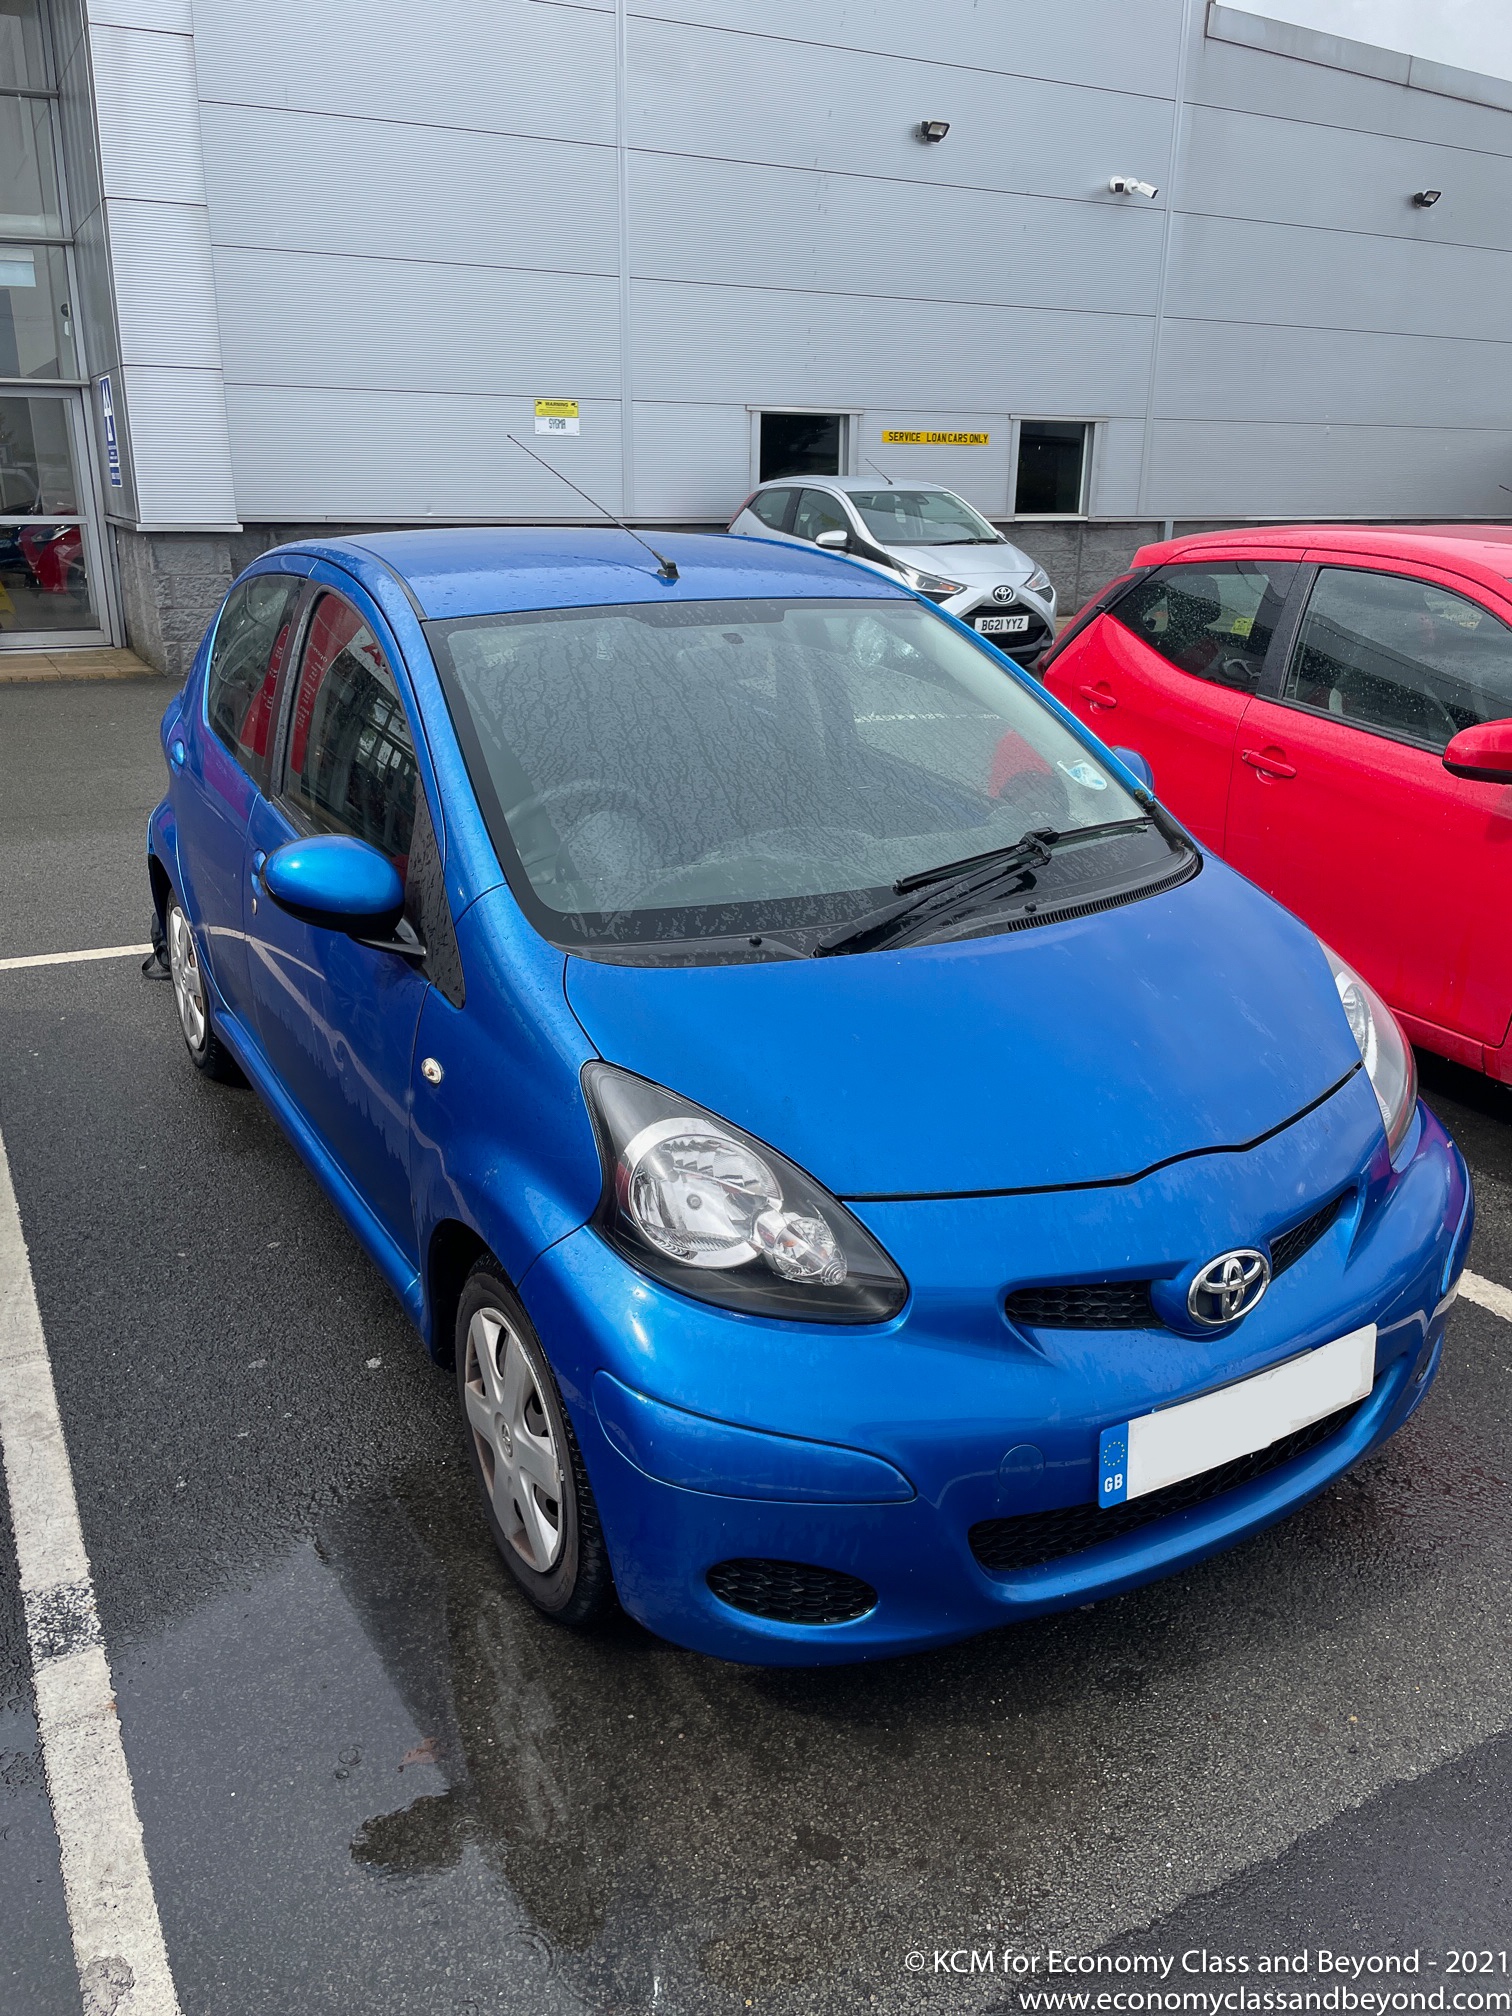 Long Term Review - Toyota Aygo (2010), Seven years on - Economy Class &  Beyond